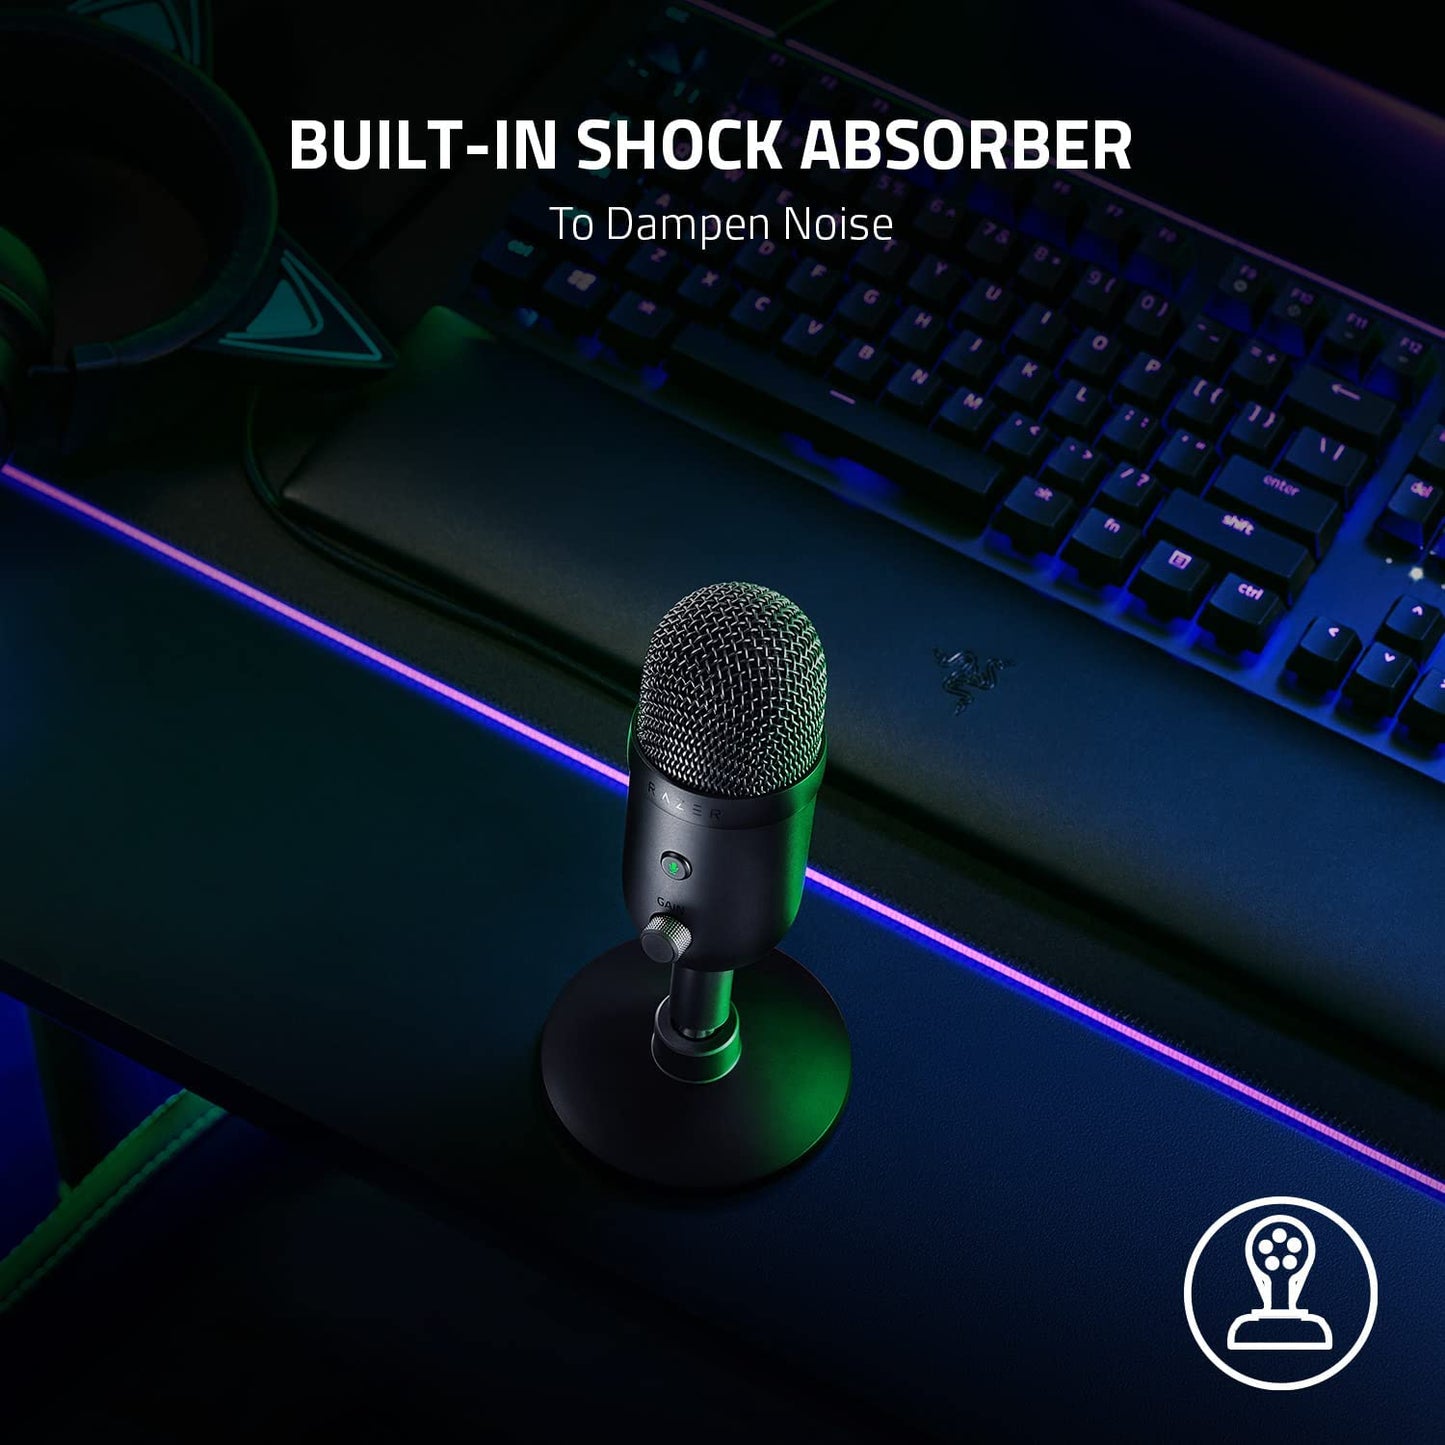 Razer Seiren V2 X USB Condenser Microphone for Streaming and Gaming